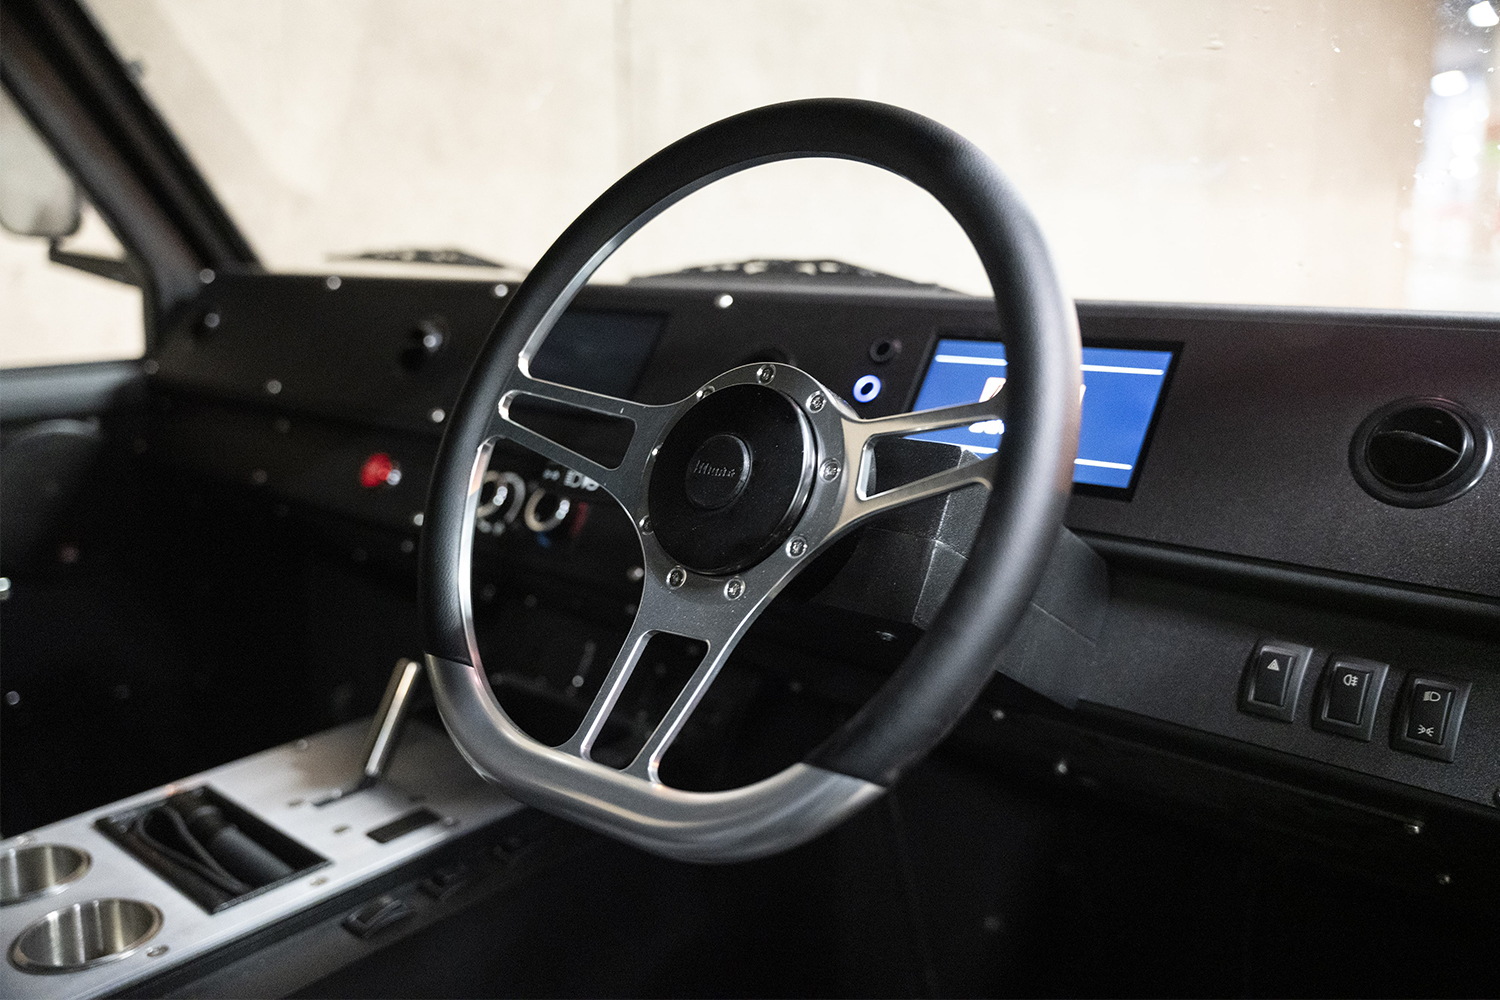 The interior and dashboard of the Munro MK_1, a new electric 4x4 that will be built in Scotland